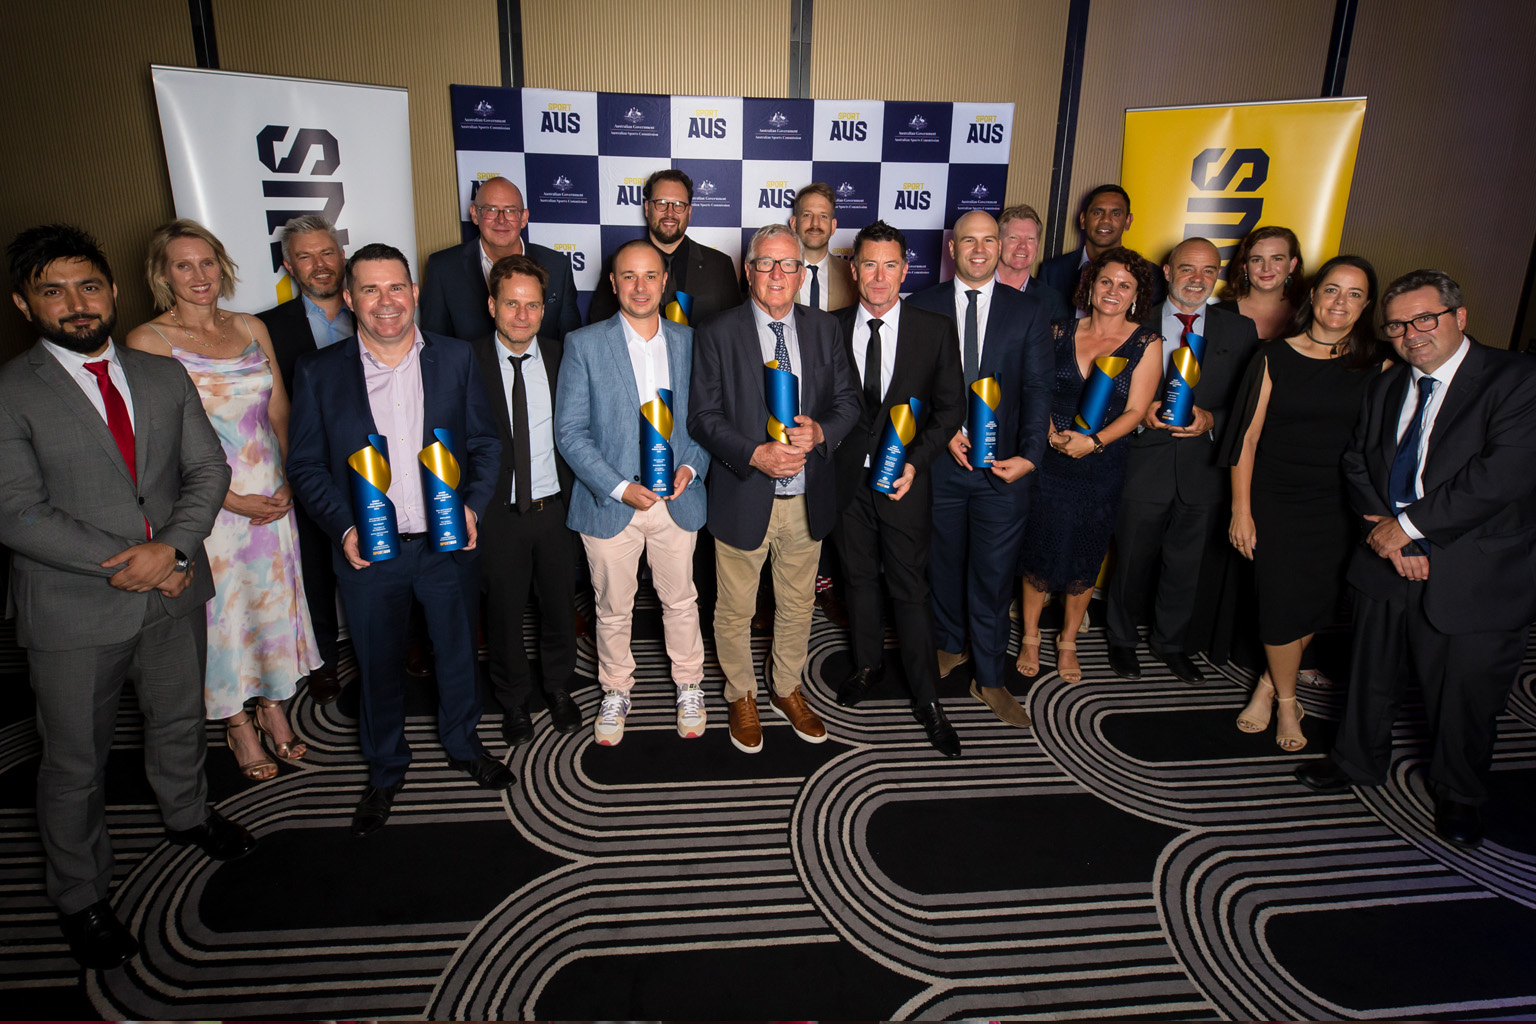 Winners from the 2021 Media Awards gathered with their trophies